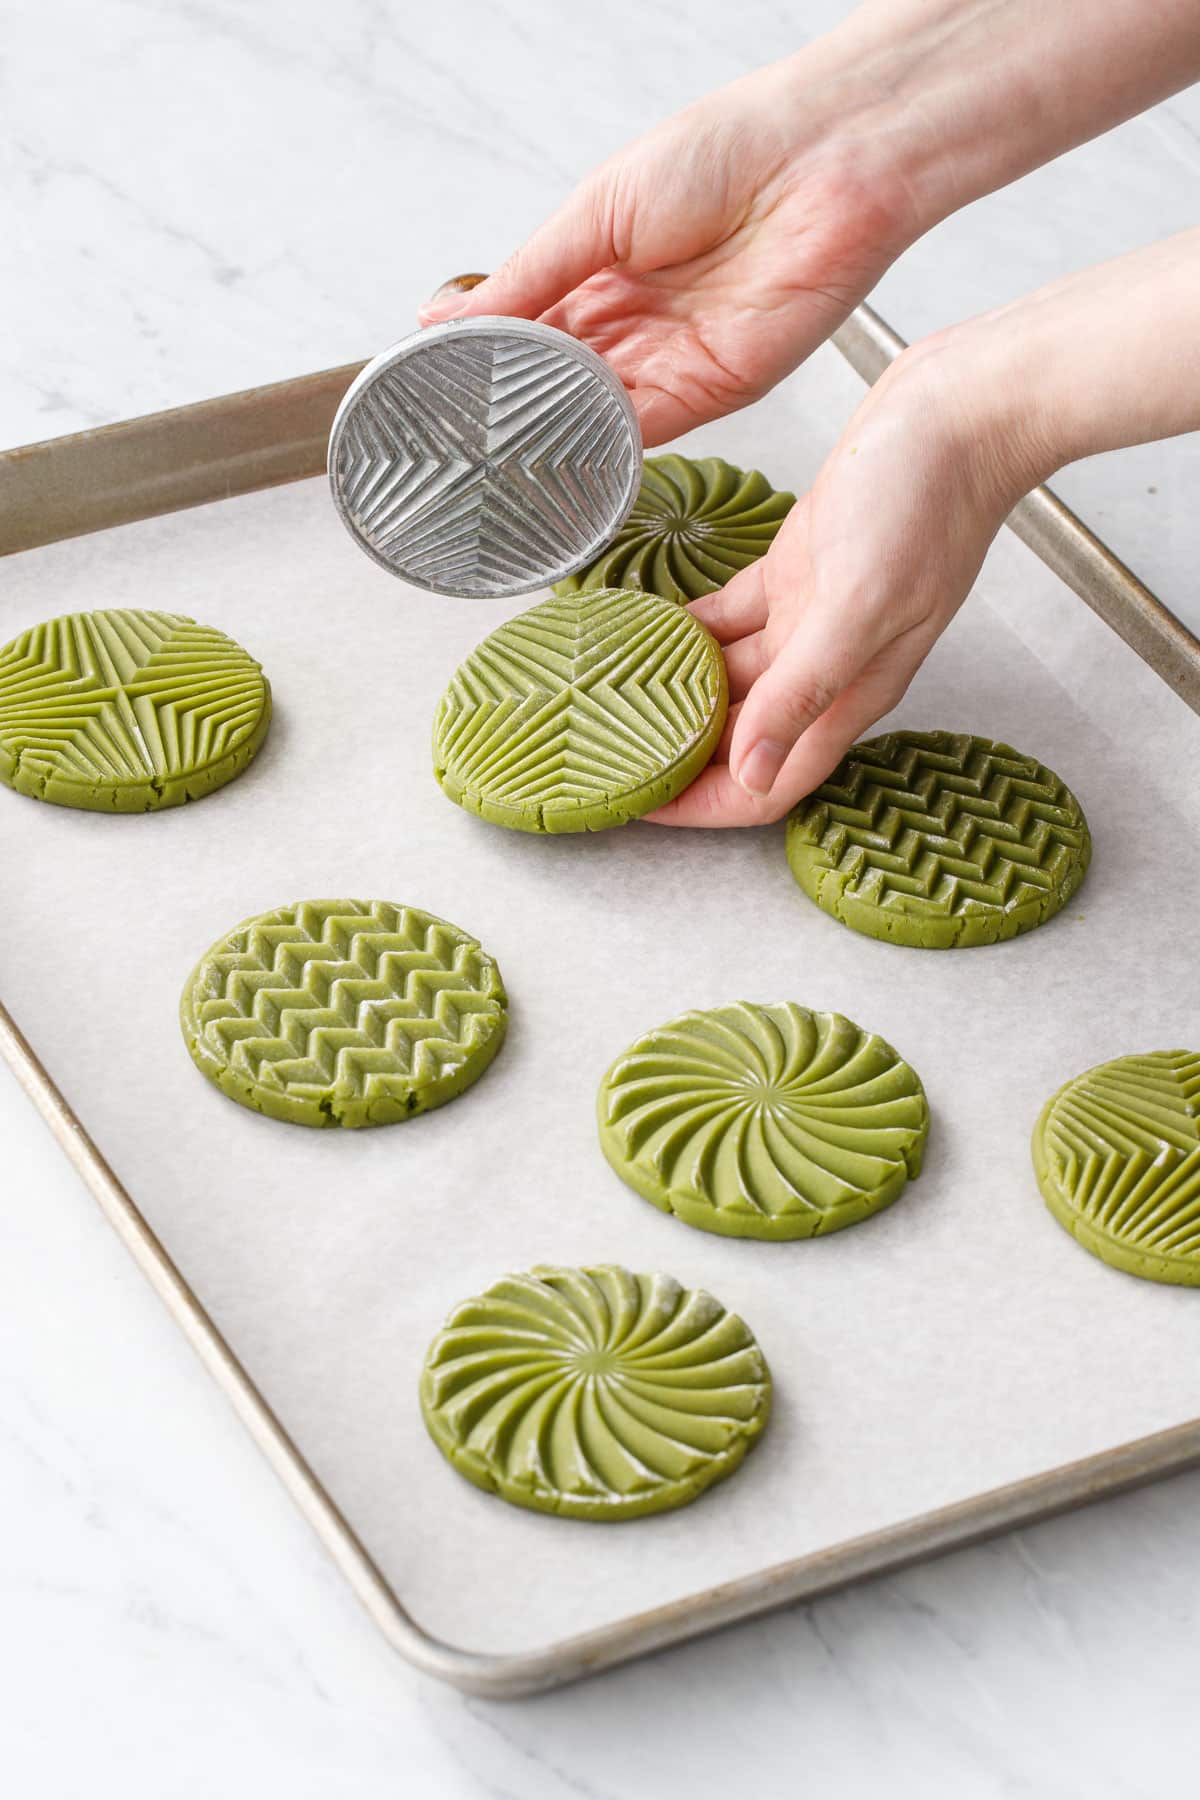 Arranging the stamped cookies on a parchment-lined baking sheet with a few inches of space between them.